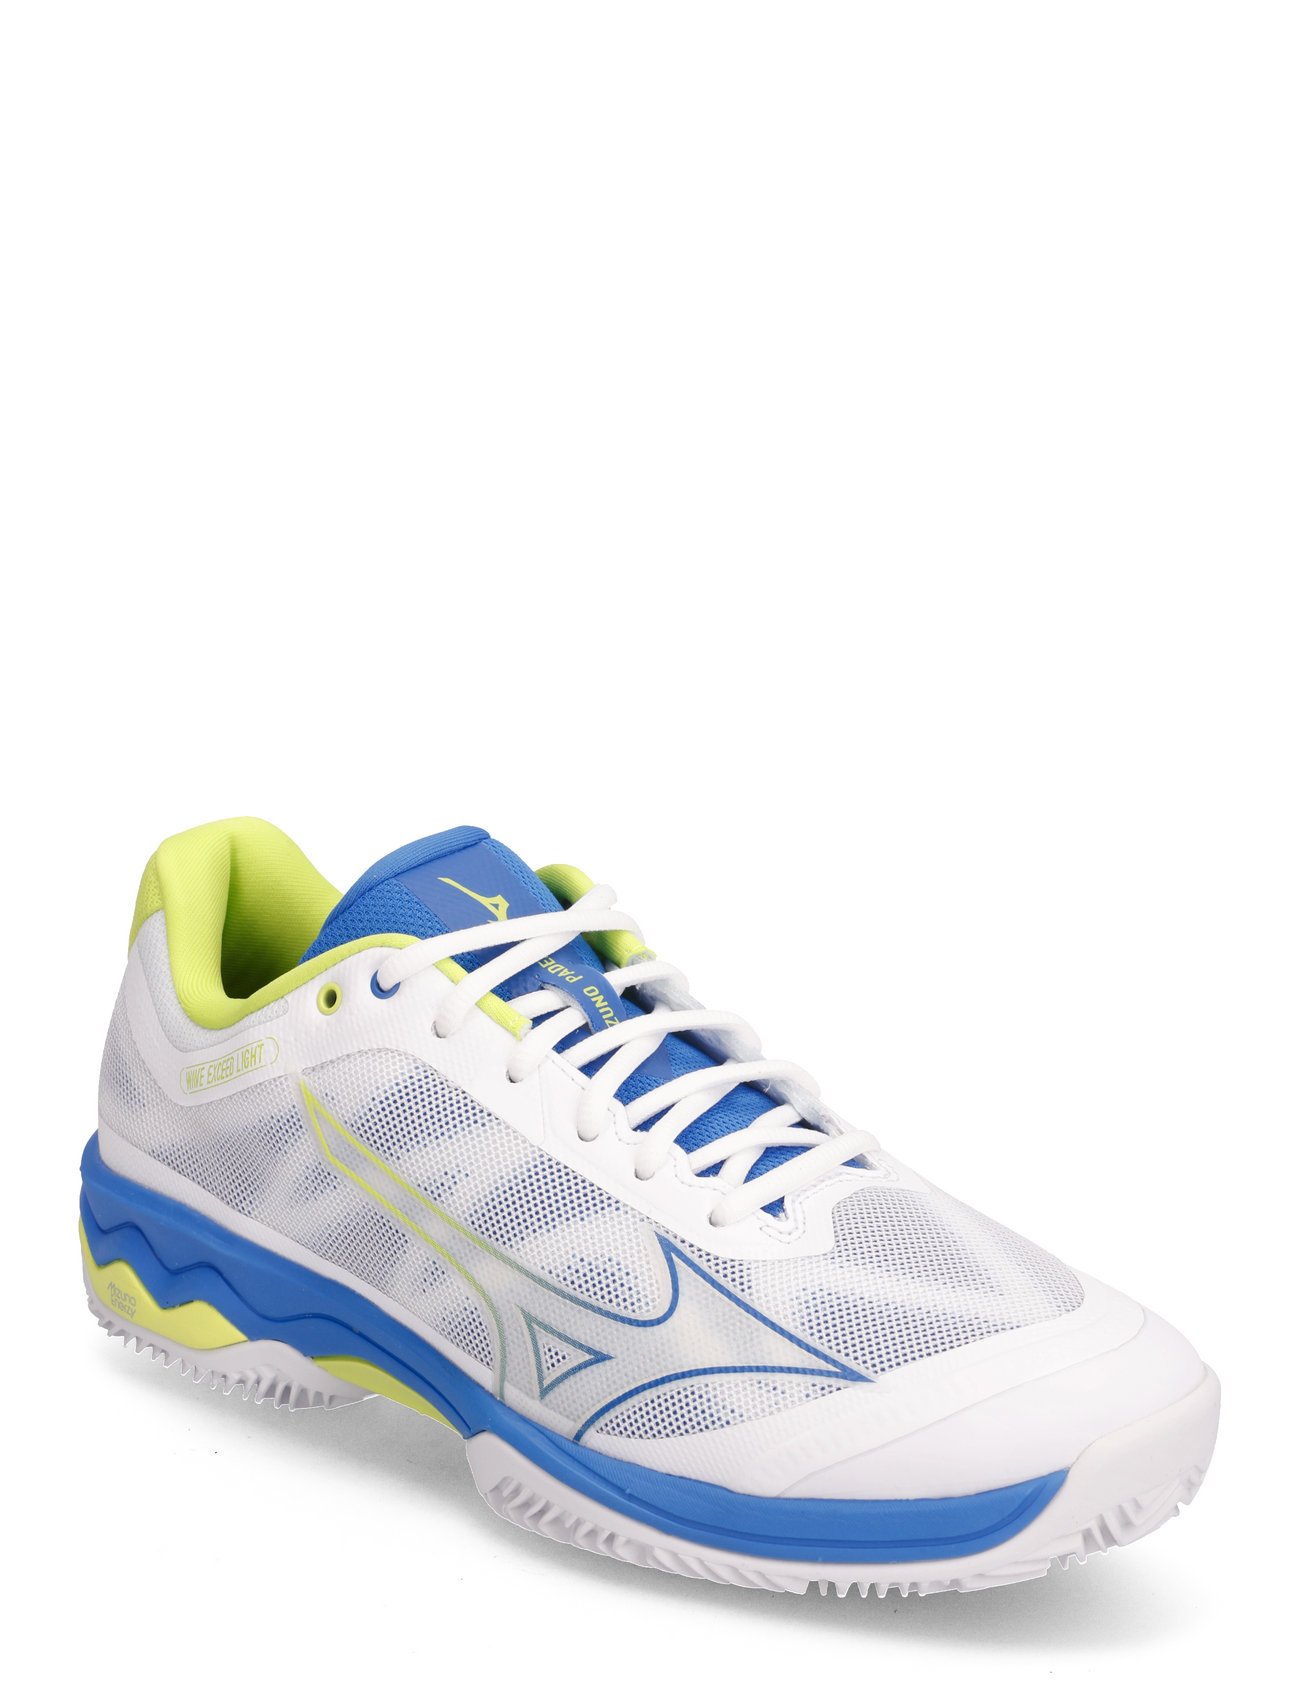 Wave Exceed Lgtpadel Sport Sport Shoes Racketsports Shoes Padel Shoes Multi/patterned Mizuno